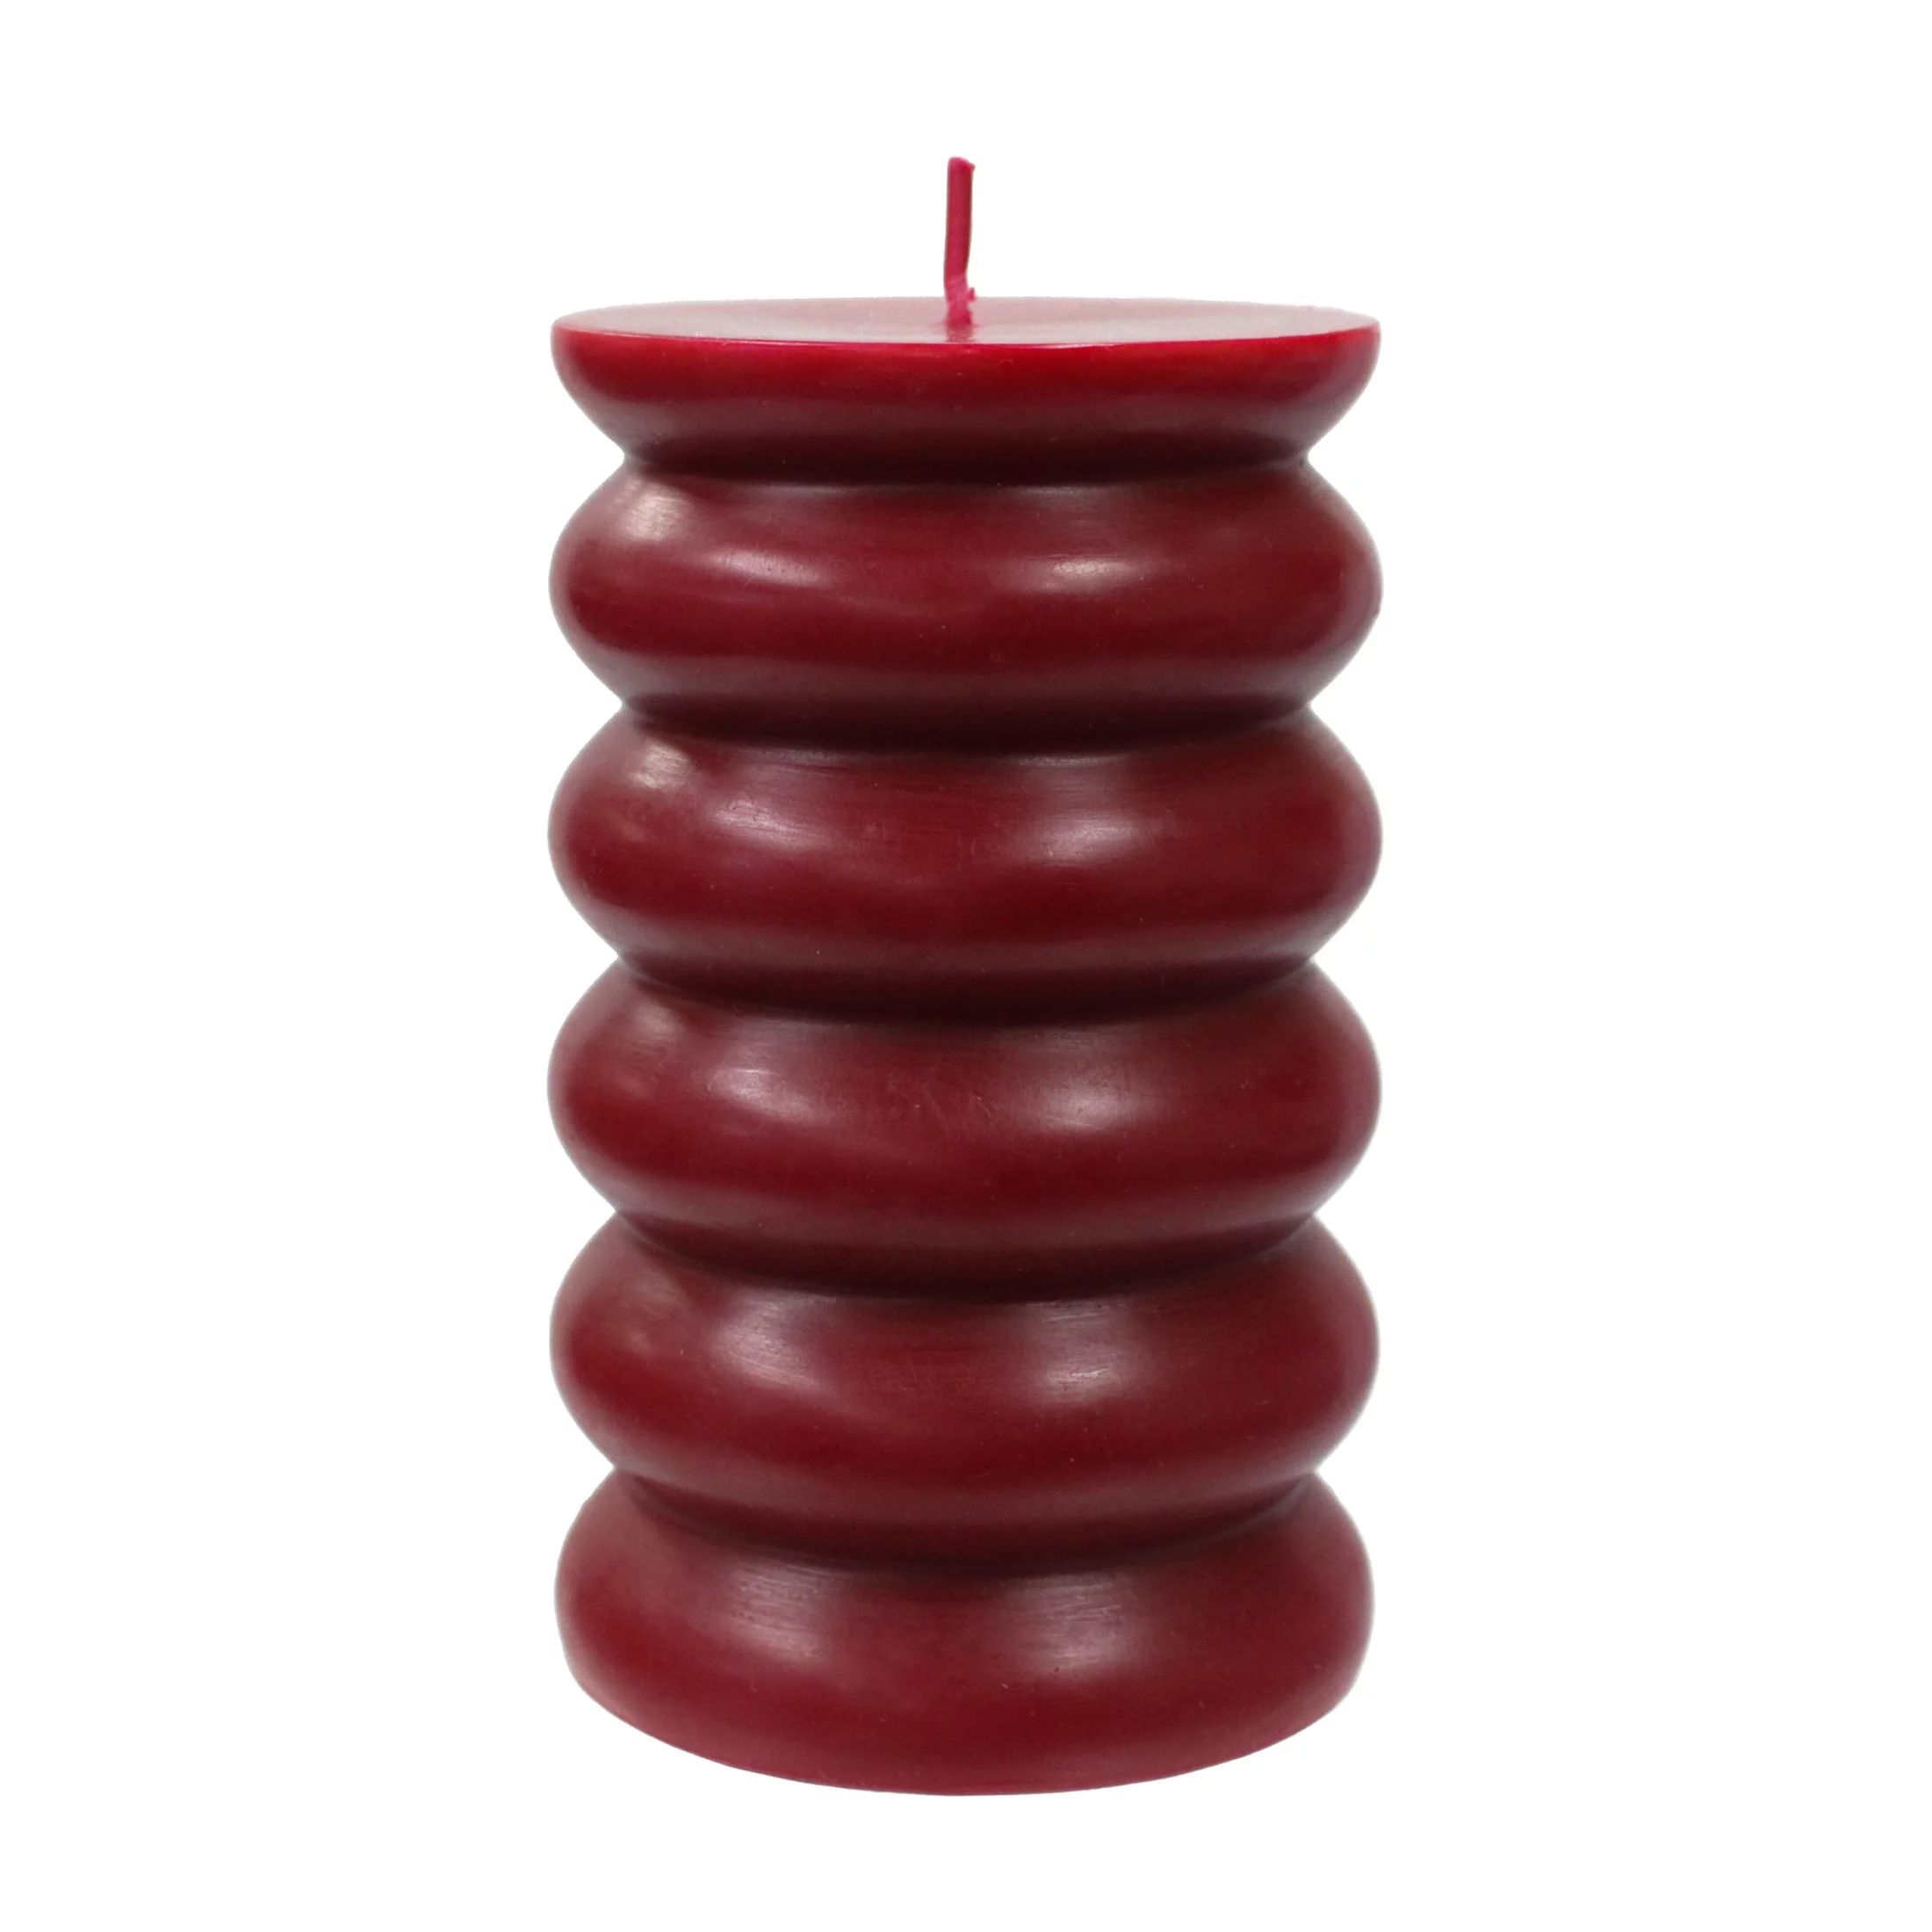 Better Homes & Gardens Unscented Bubble Pillar Candle, 3x5 inches, Red | Walmart (US)